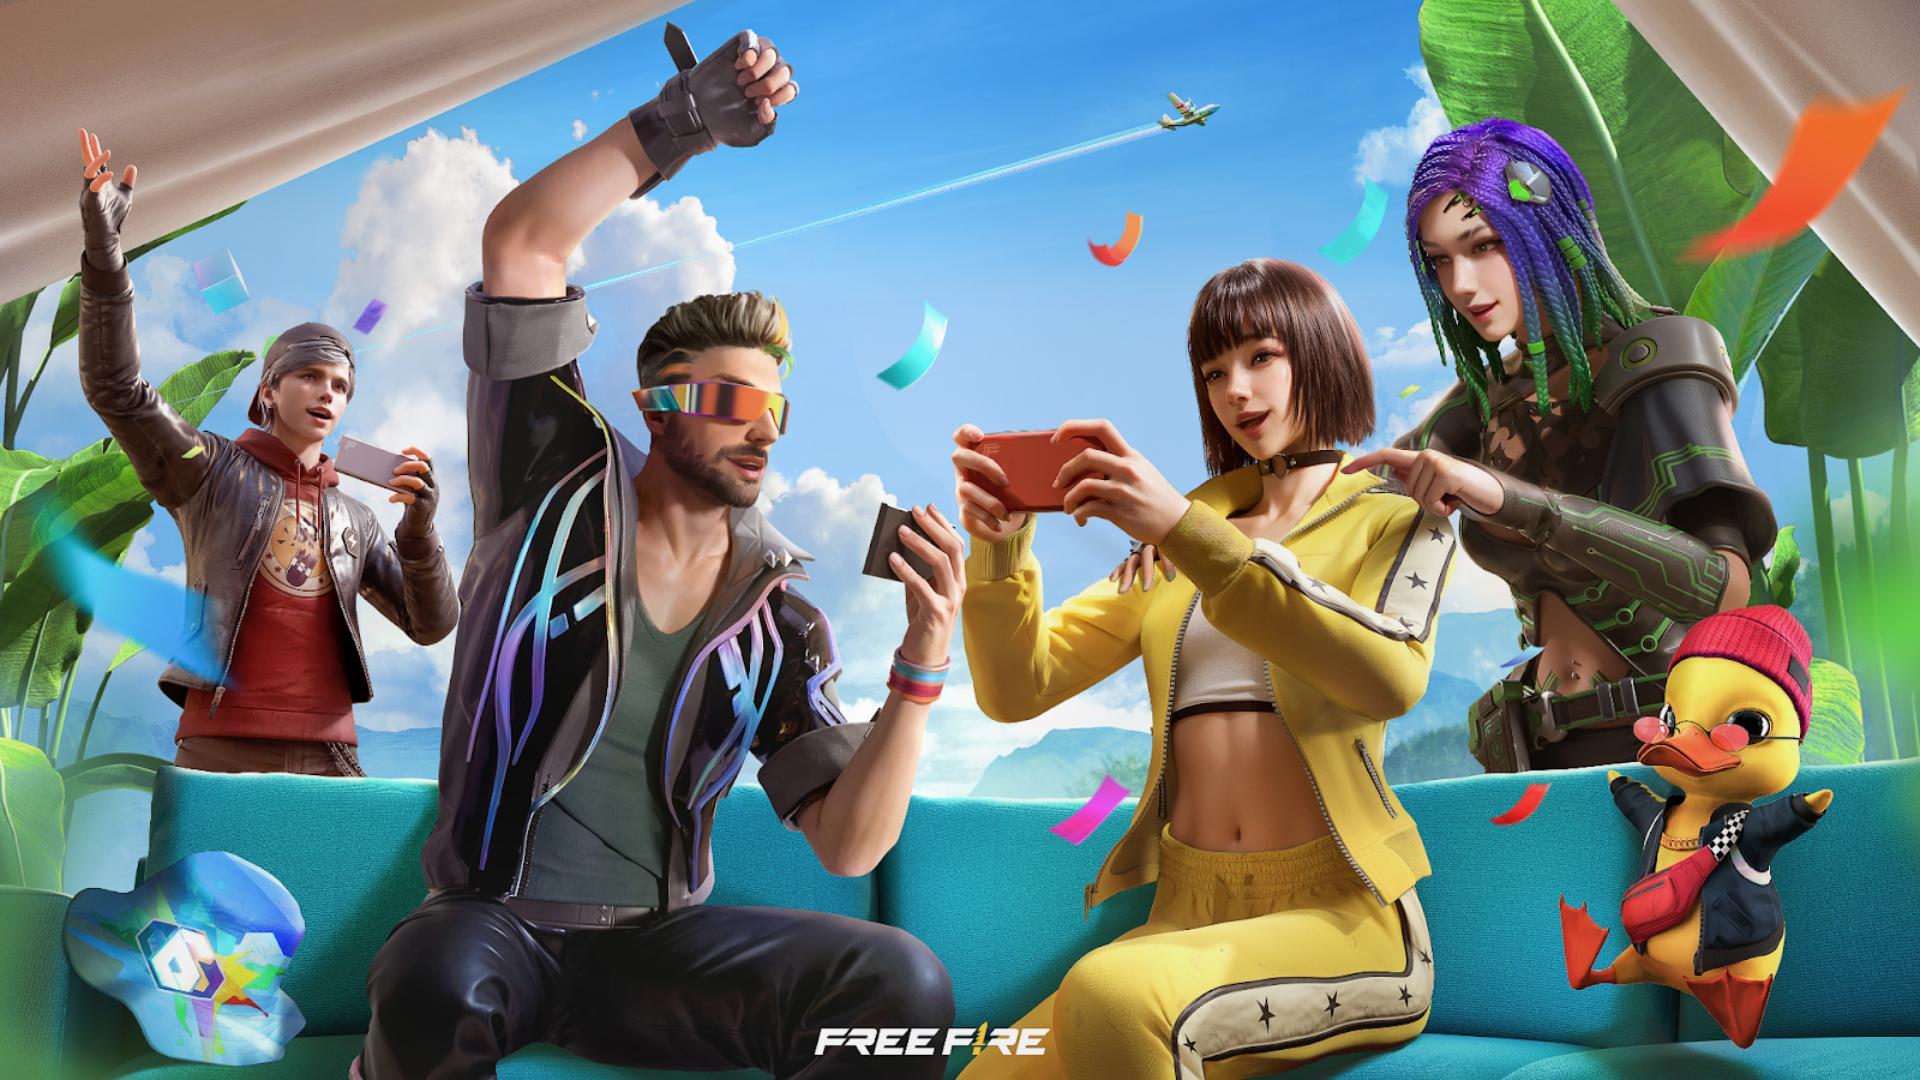 Free Fire: The battle royale game for mobile devices